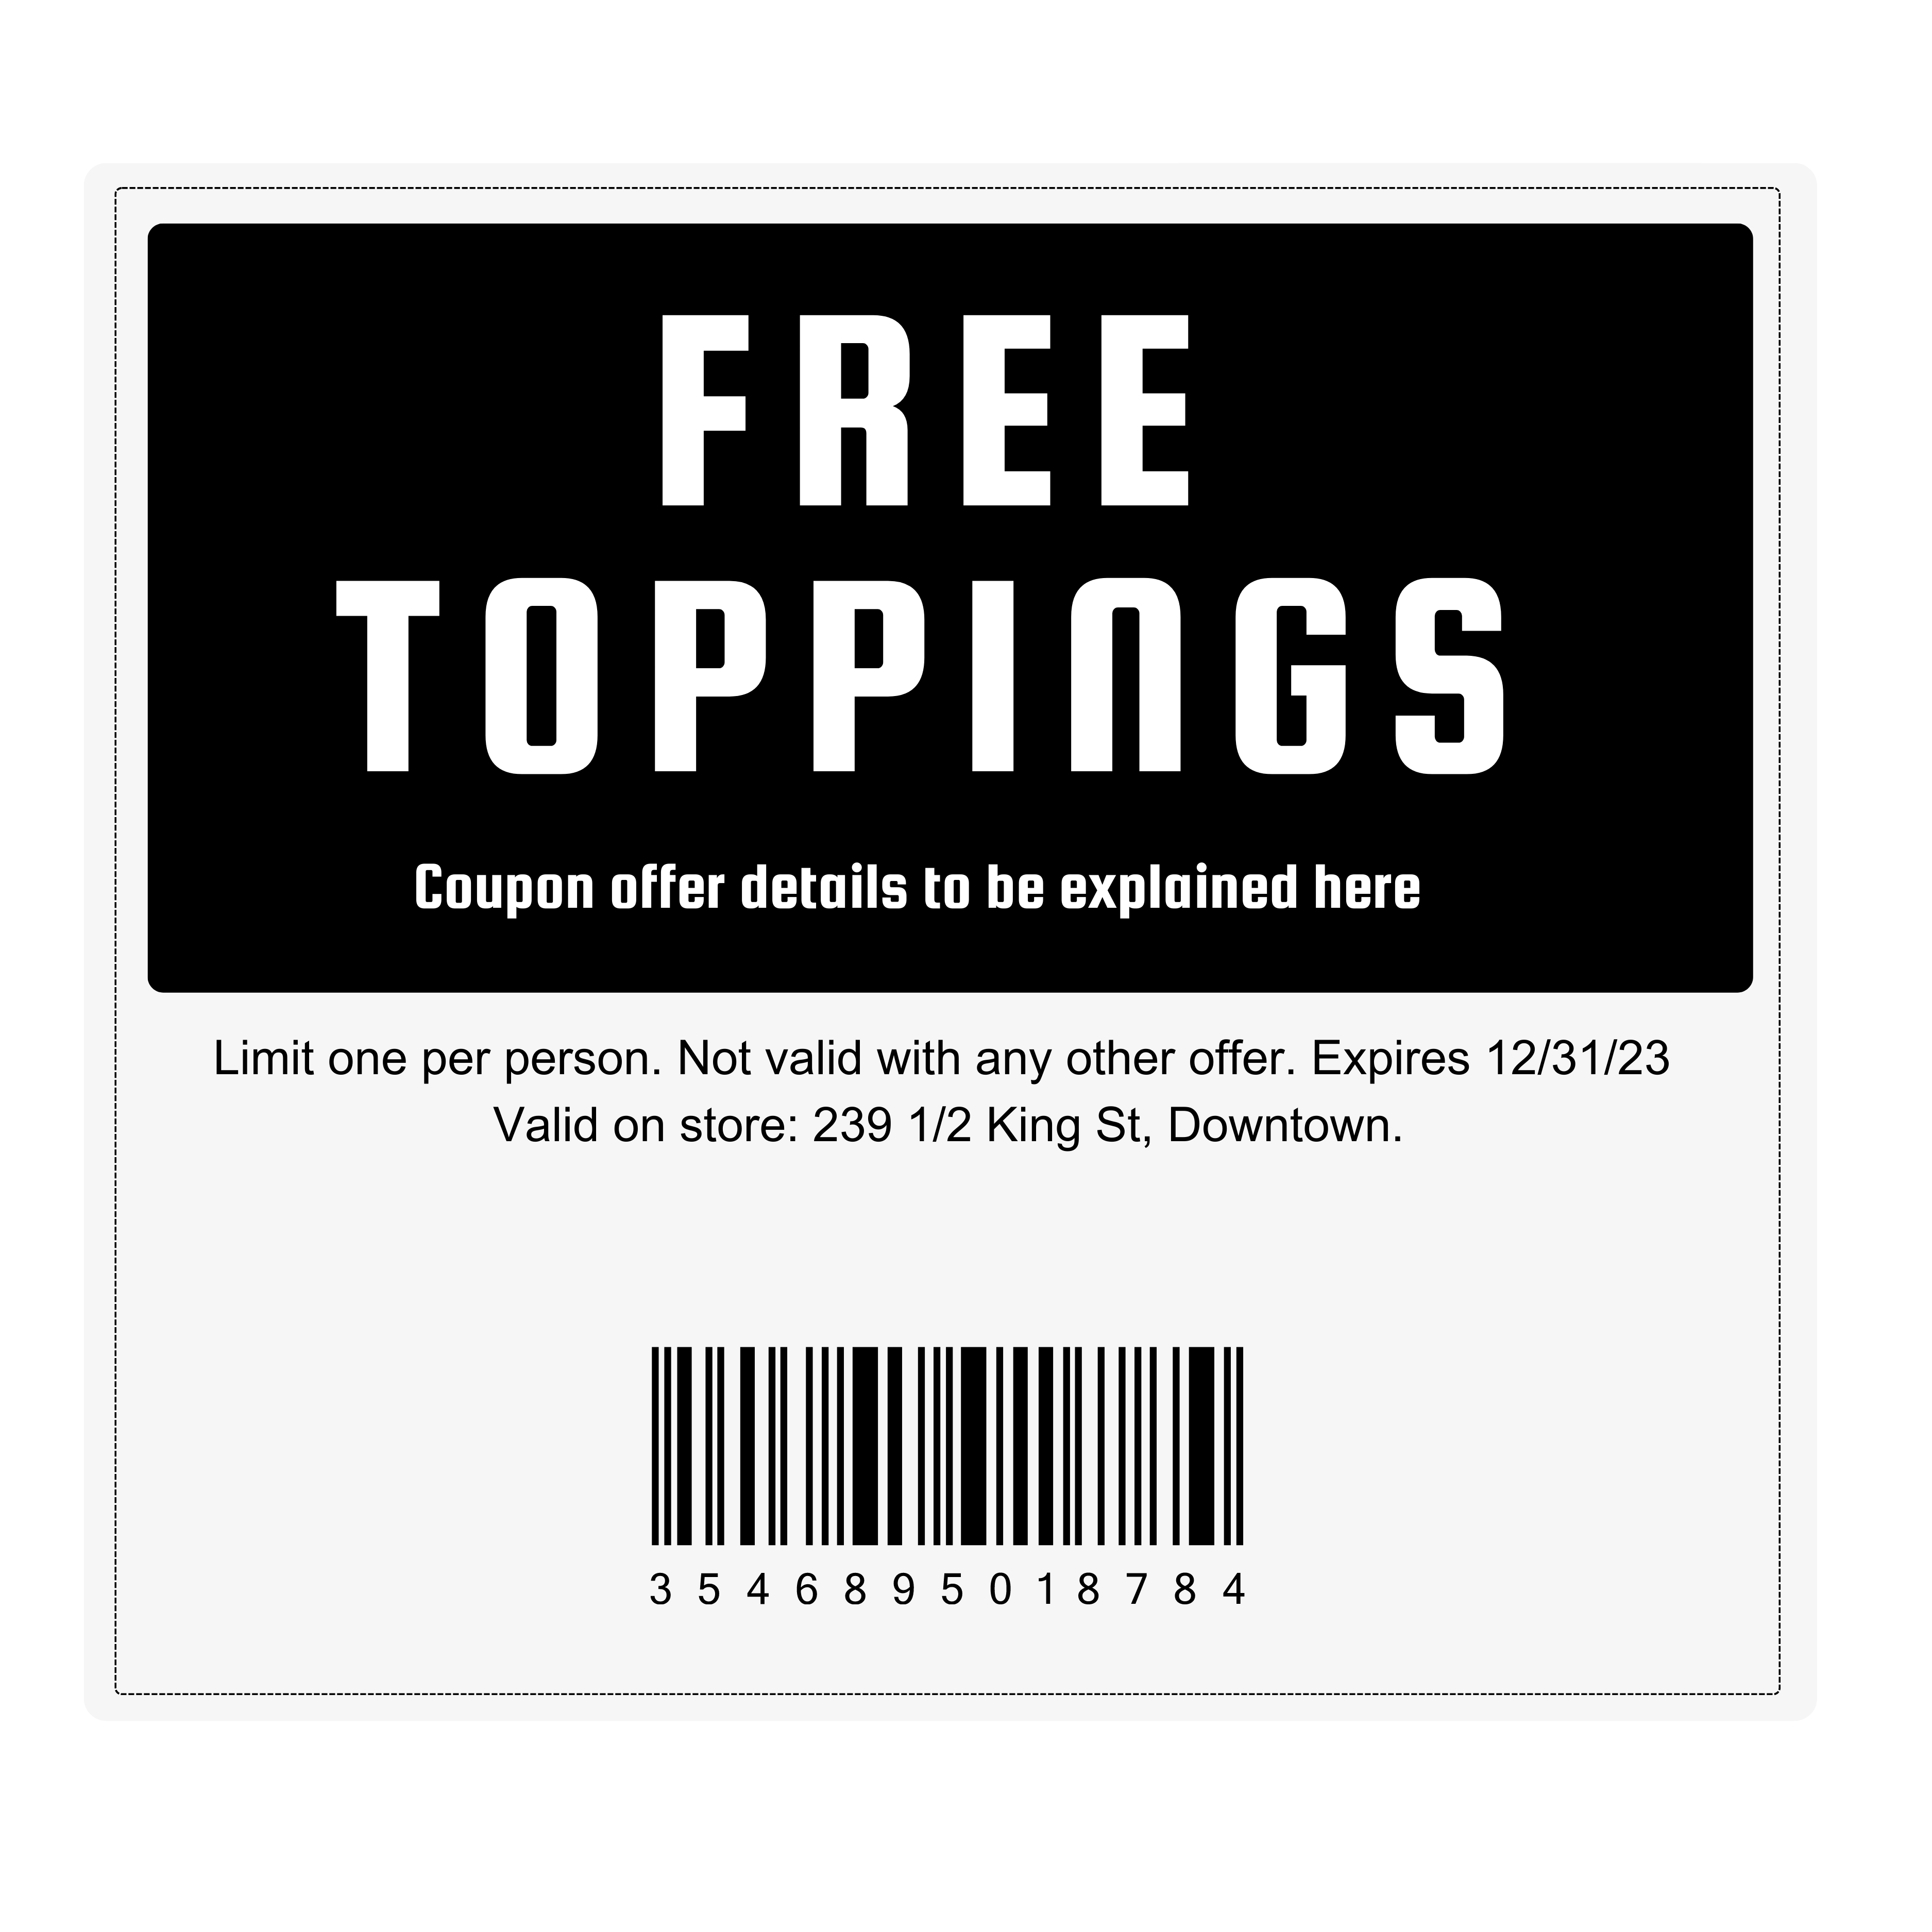 Free Sample, Coupon Required to make it Free, Limit one per household